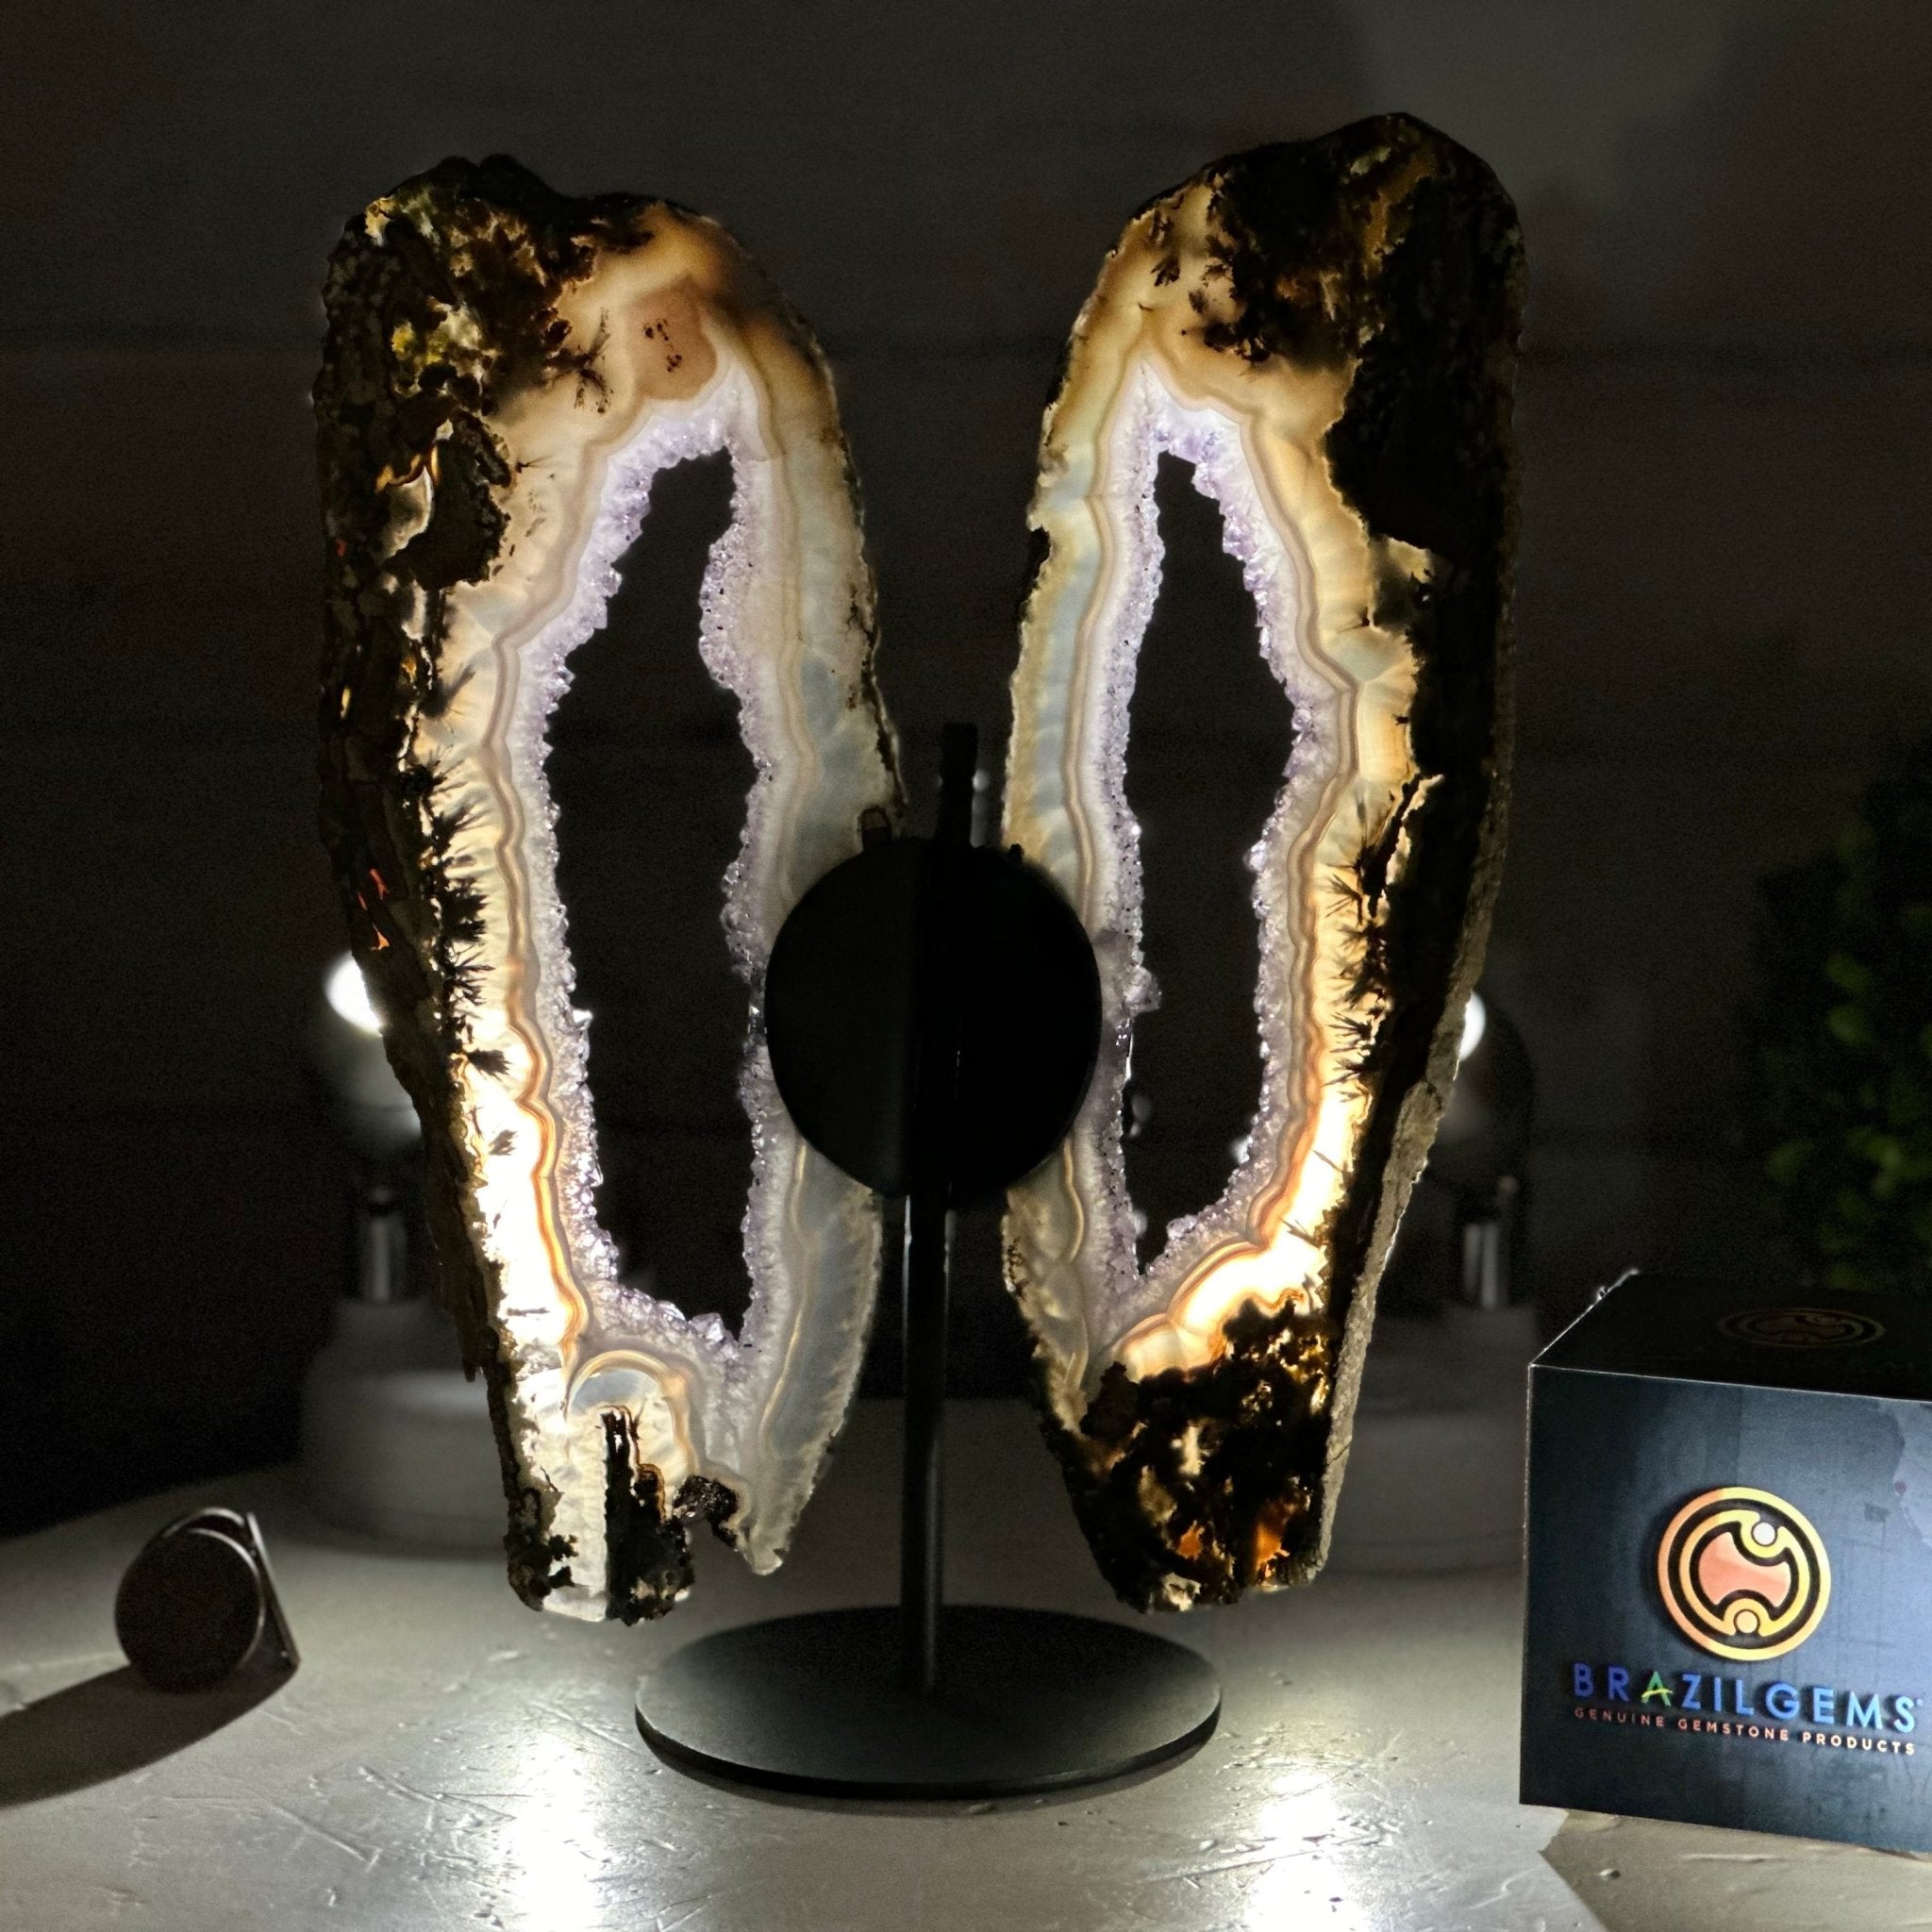 Natural Brazilian Agate "Butterfly Wings", 9.5" Tall #5050NA-144 - Brazil GemsBrazil GemsNatural Brazilian Agate "Butterfly Wings", 9.5" Tall #5050NA-144Agate Butterfly Wings5050NA-144